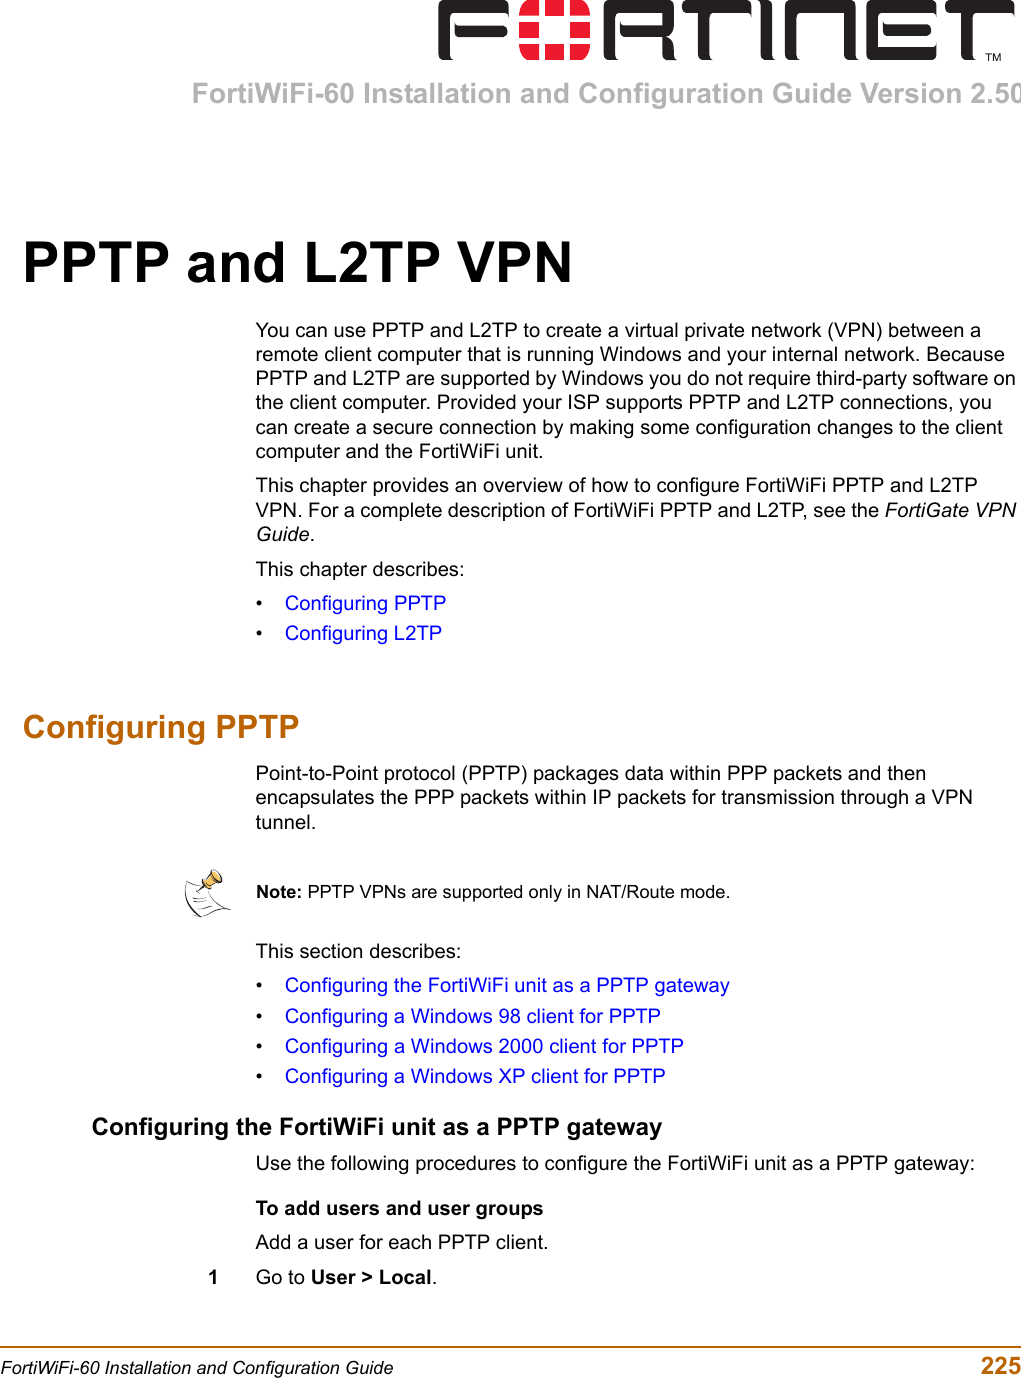 FortiWiFi-60 Installation and Configuration Guide Version 2.50FortiWiFi-60 Installation and Configuration Guide  225PPTP and L2TP VPNYou can use PPTP and L2TP to create a virtual private network (VPN) between a remote client computer that is running Windows and your internal network. Because PPTP and L2TP are supported by Windows you do not require third-party software on the client computer. Provided your ISP supports PPTP and L2TP connections, you can create a secure connection by making some configuration changes to the client computer and the FortiWiFi unit.This chapter provides an overview of how to configure FortiWiFi PPTP and L2TP VPN. For a complete description of FortiWiFi PPTP and L2TP, see the FortiGate VPN Guide.This chapter describes:•Configuring PPTP•Configuring L2TPConfiguring PPTPPoint-to-Point protocol (PPTP) packages data within PPP packets and then encapsulates the PPP packets within IP packets for transmission through a VPN tunnel.This section describes: •Configuring the FortiWiFi unit as a PPTP gateway•Configuring a Windows 98 client for PPTP•Configuring a Windows 2000 client for PPTP•Configuring a Windows XP client for PPTPConfiguring the FortiWiFi unit as a PPTP gatewayUse the following procedures to configure the FortiWiFi unit as a PPTP gateway:To add users and user groupsAdd a user for each PPTP client.1Go to User &gt; Local.Note: PPTP VPNs are supported only in NAT/Route mode.